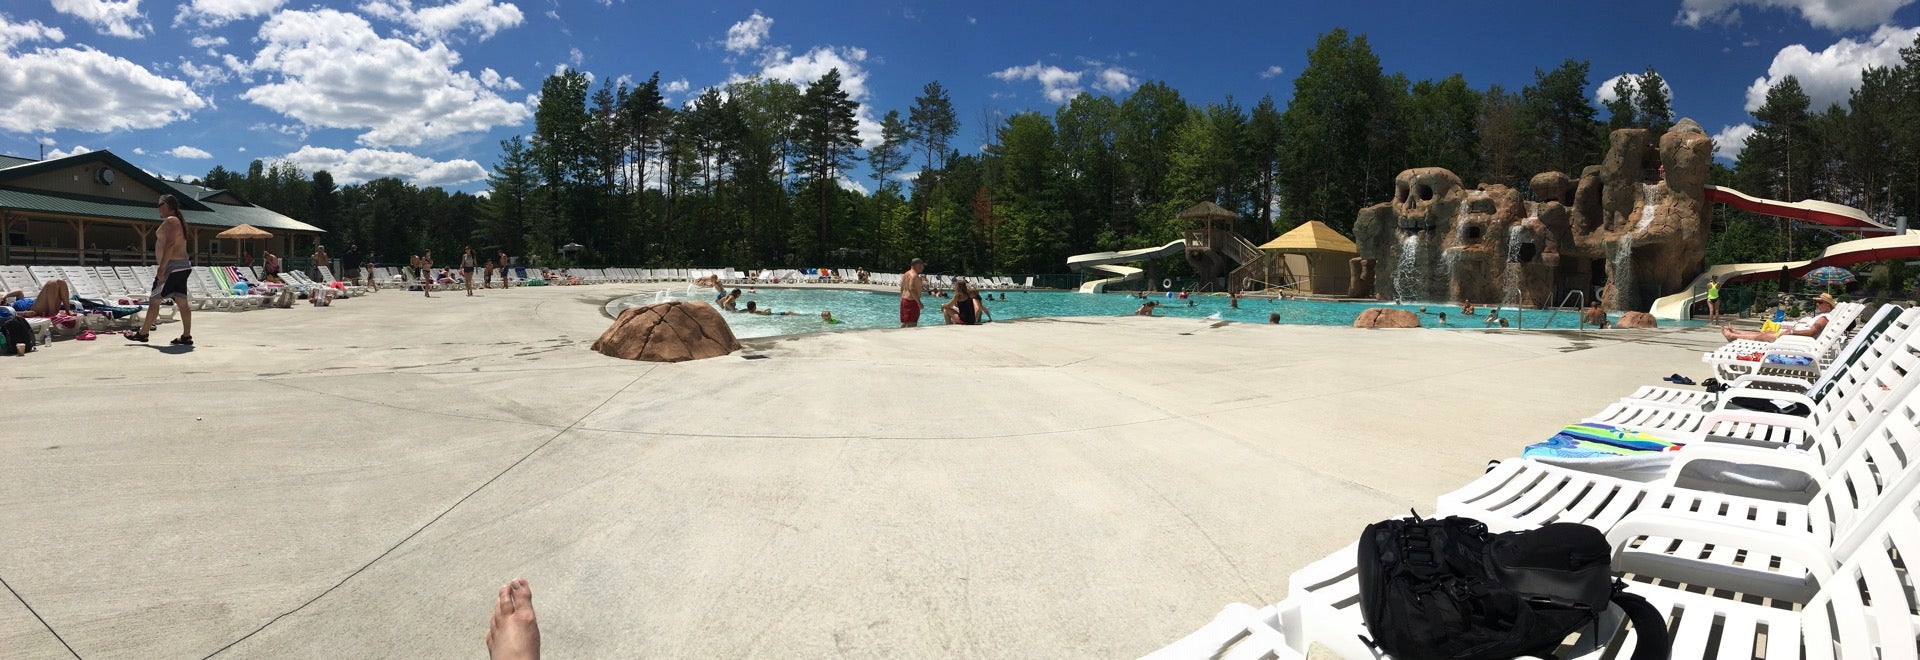 Campground Review: Moose Hillock Campground in Lake George, New